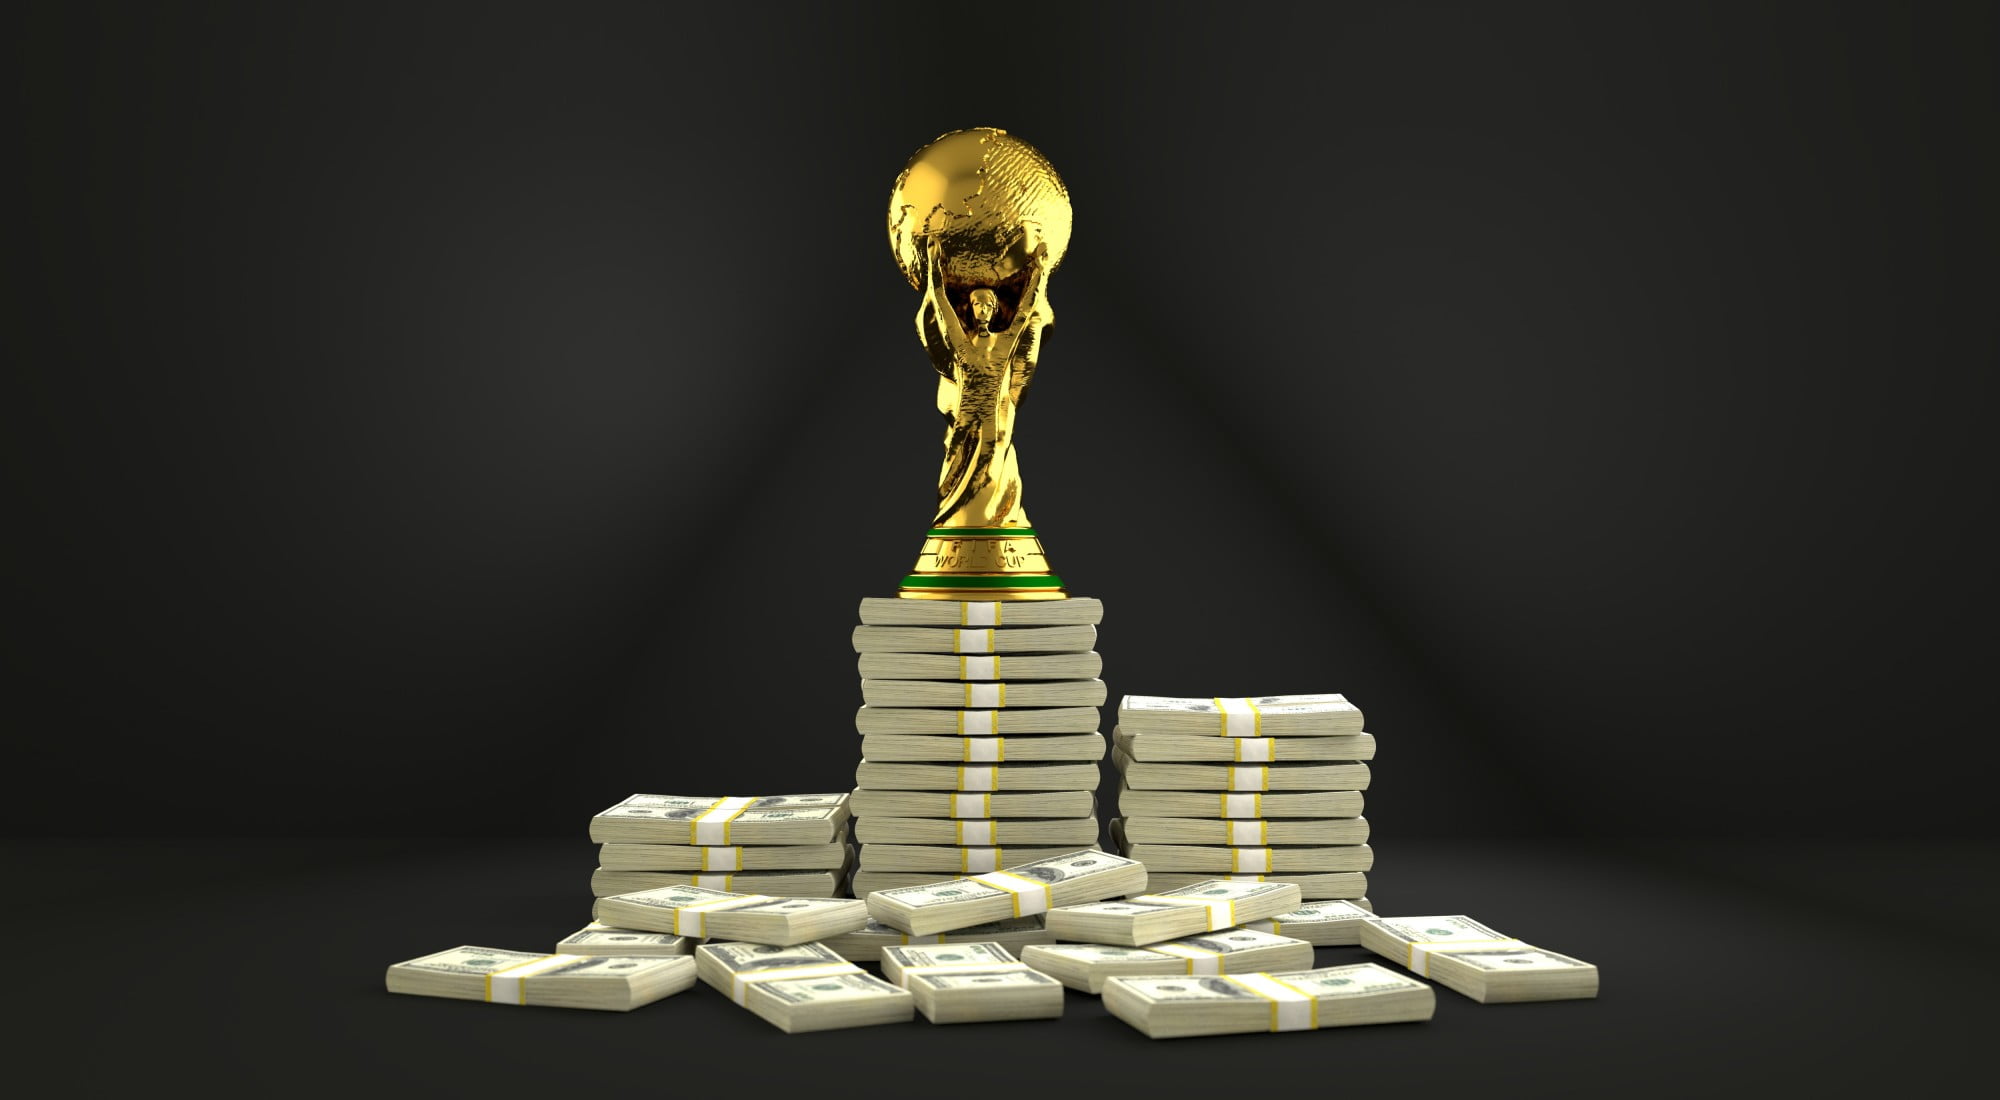 Betters are getting ready to take part in the biggest sporting event. This guide takes a closer look at the FIFA 2022 World Cup teams and their betting odds.